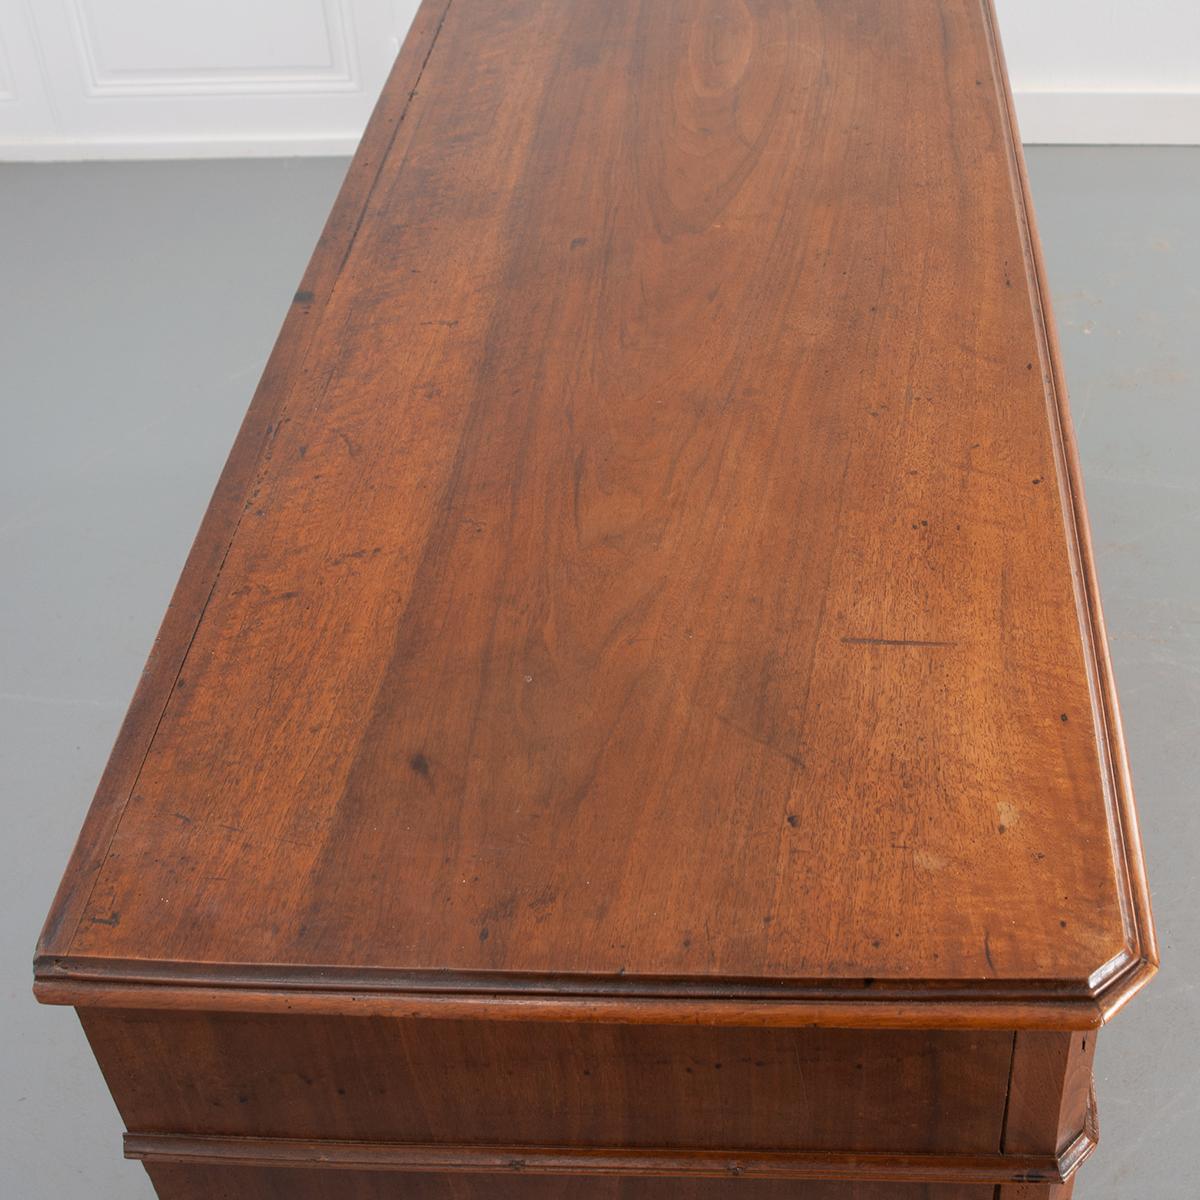 A fabulous Louis Philippe enfilade with three drawers that are set above three doors. This piece comes from 19th century France and is in spectacular condition. A stunning walnut top sits above an apron with three raised panel drawers with their